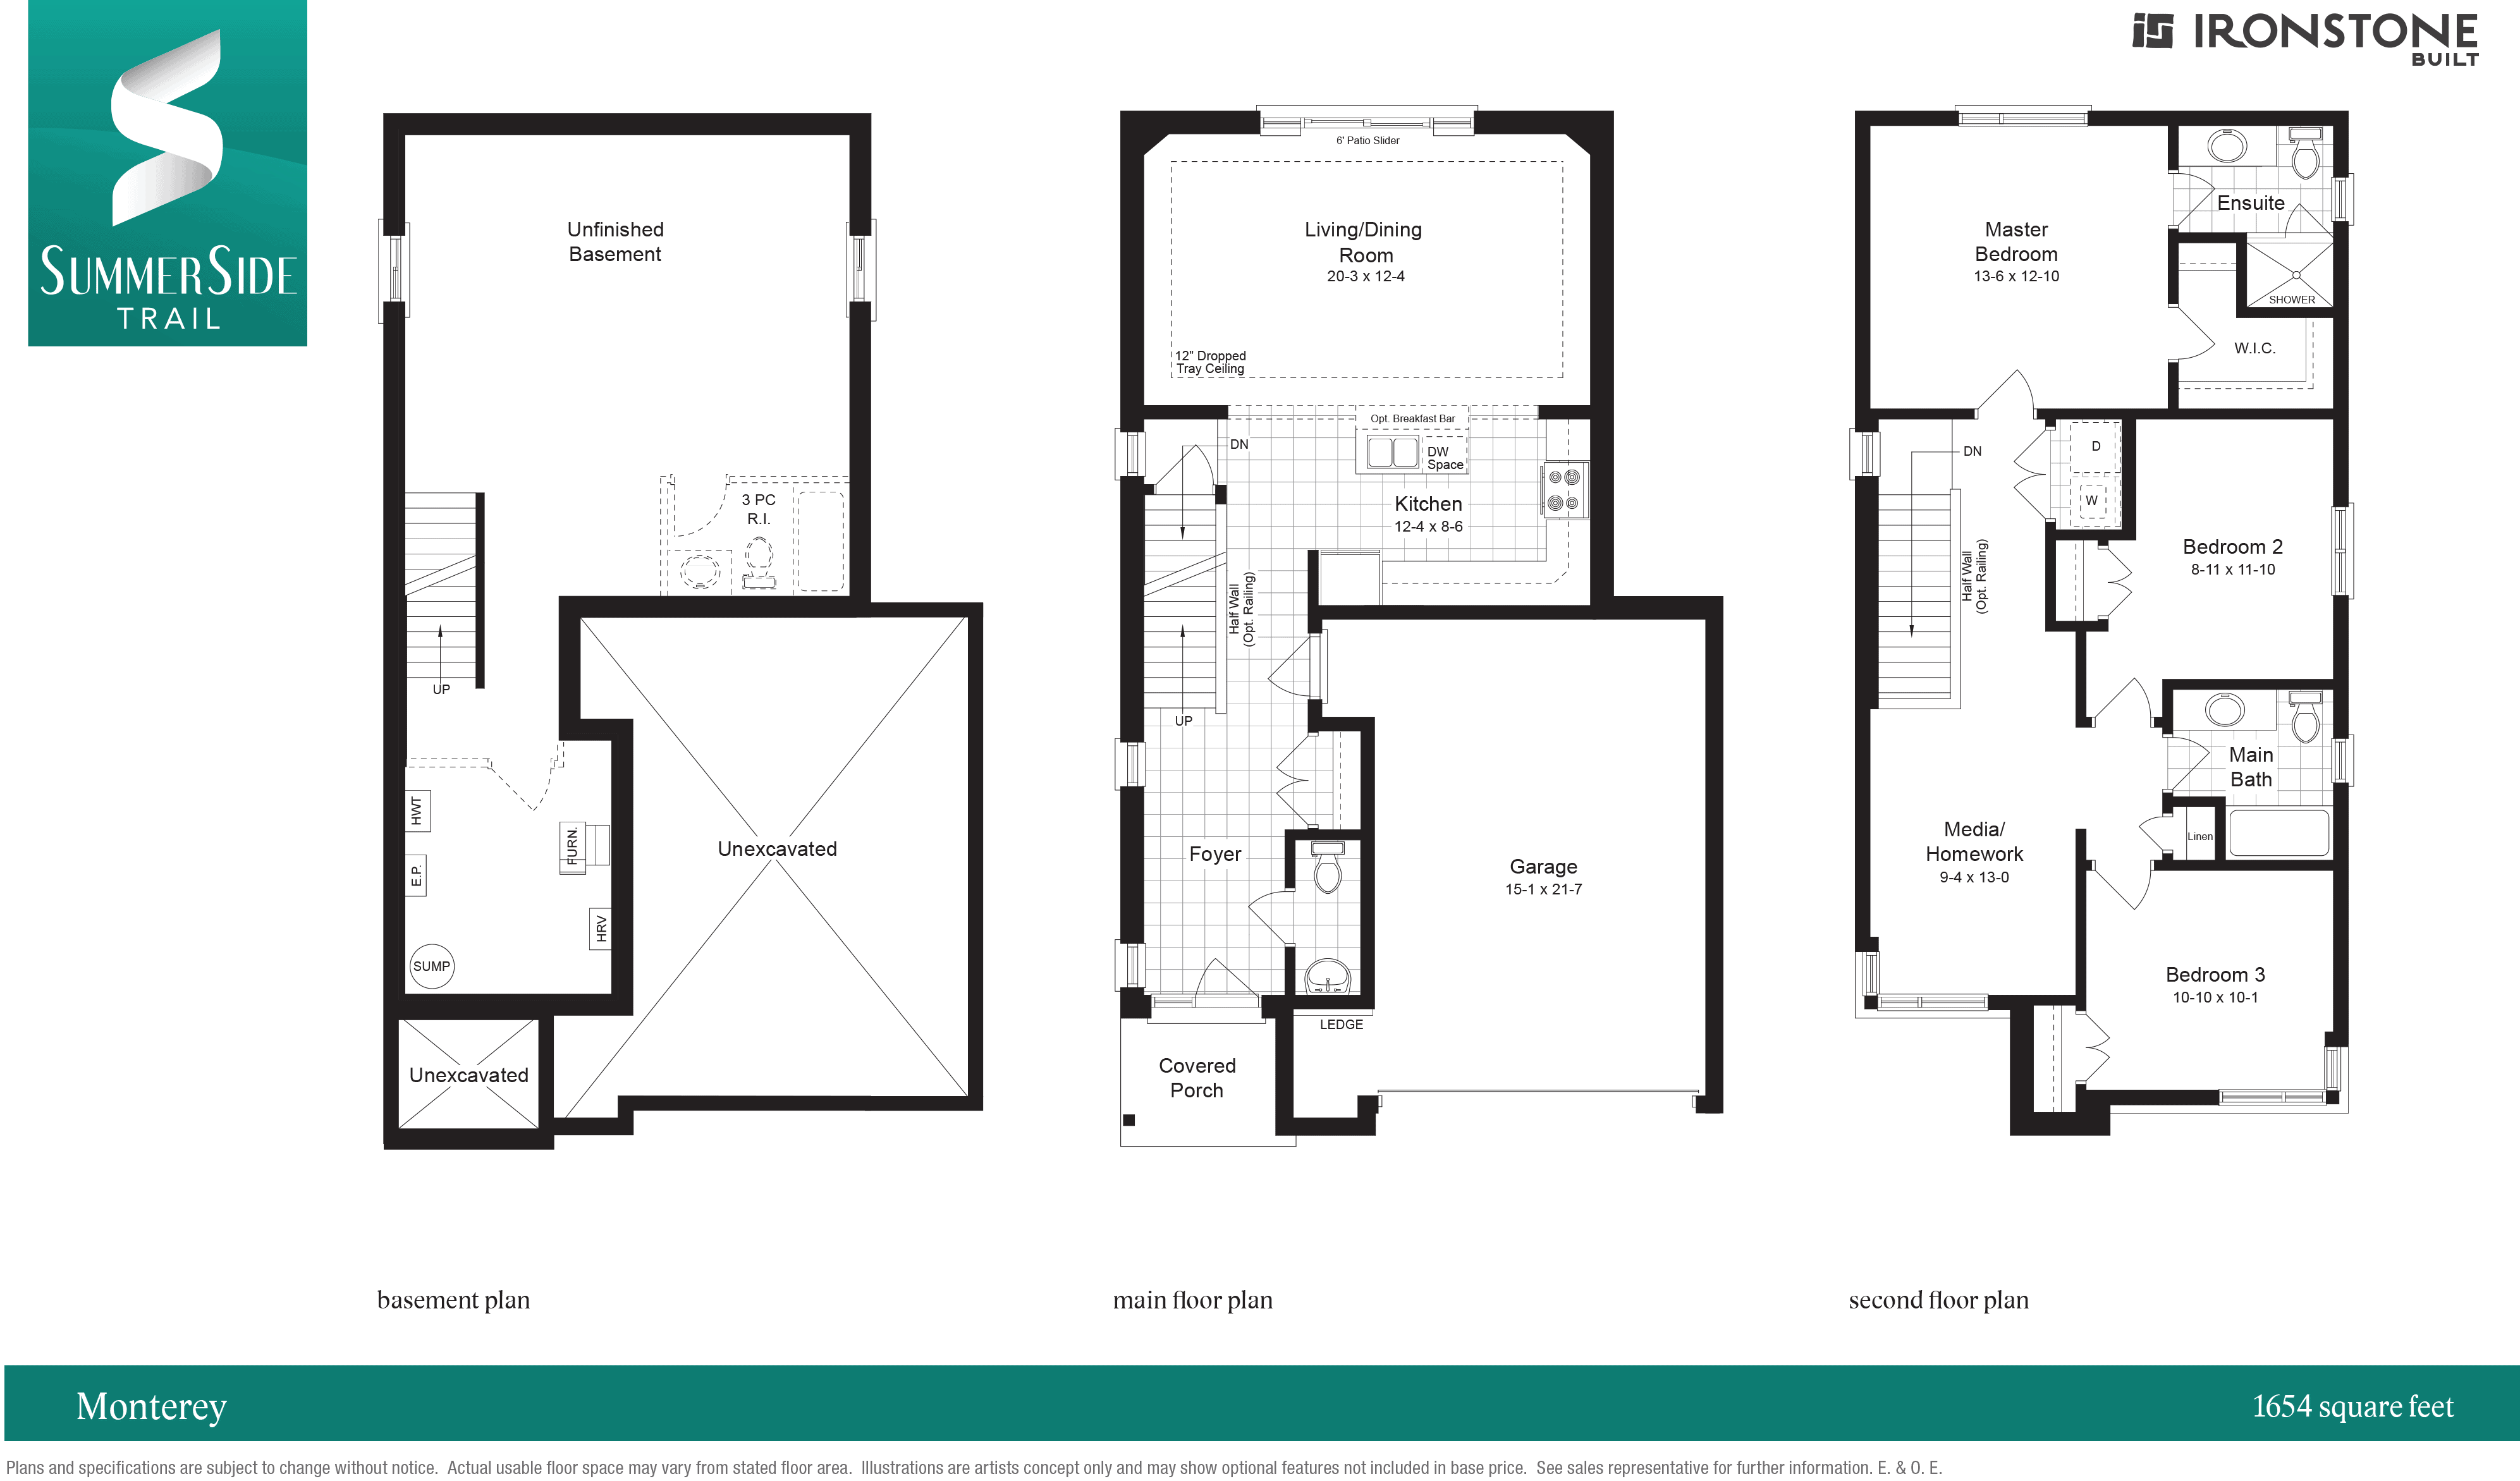  2092 Evans Blvd  Floor Plan of Summerside Trail with undefined beds